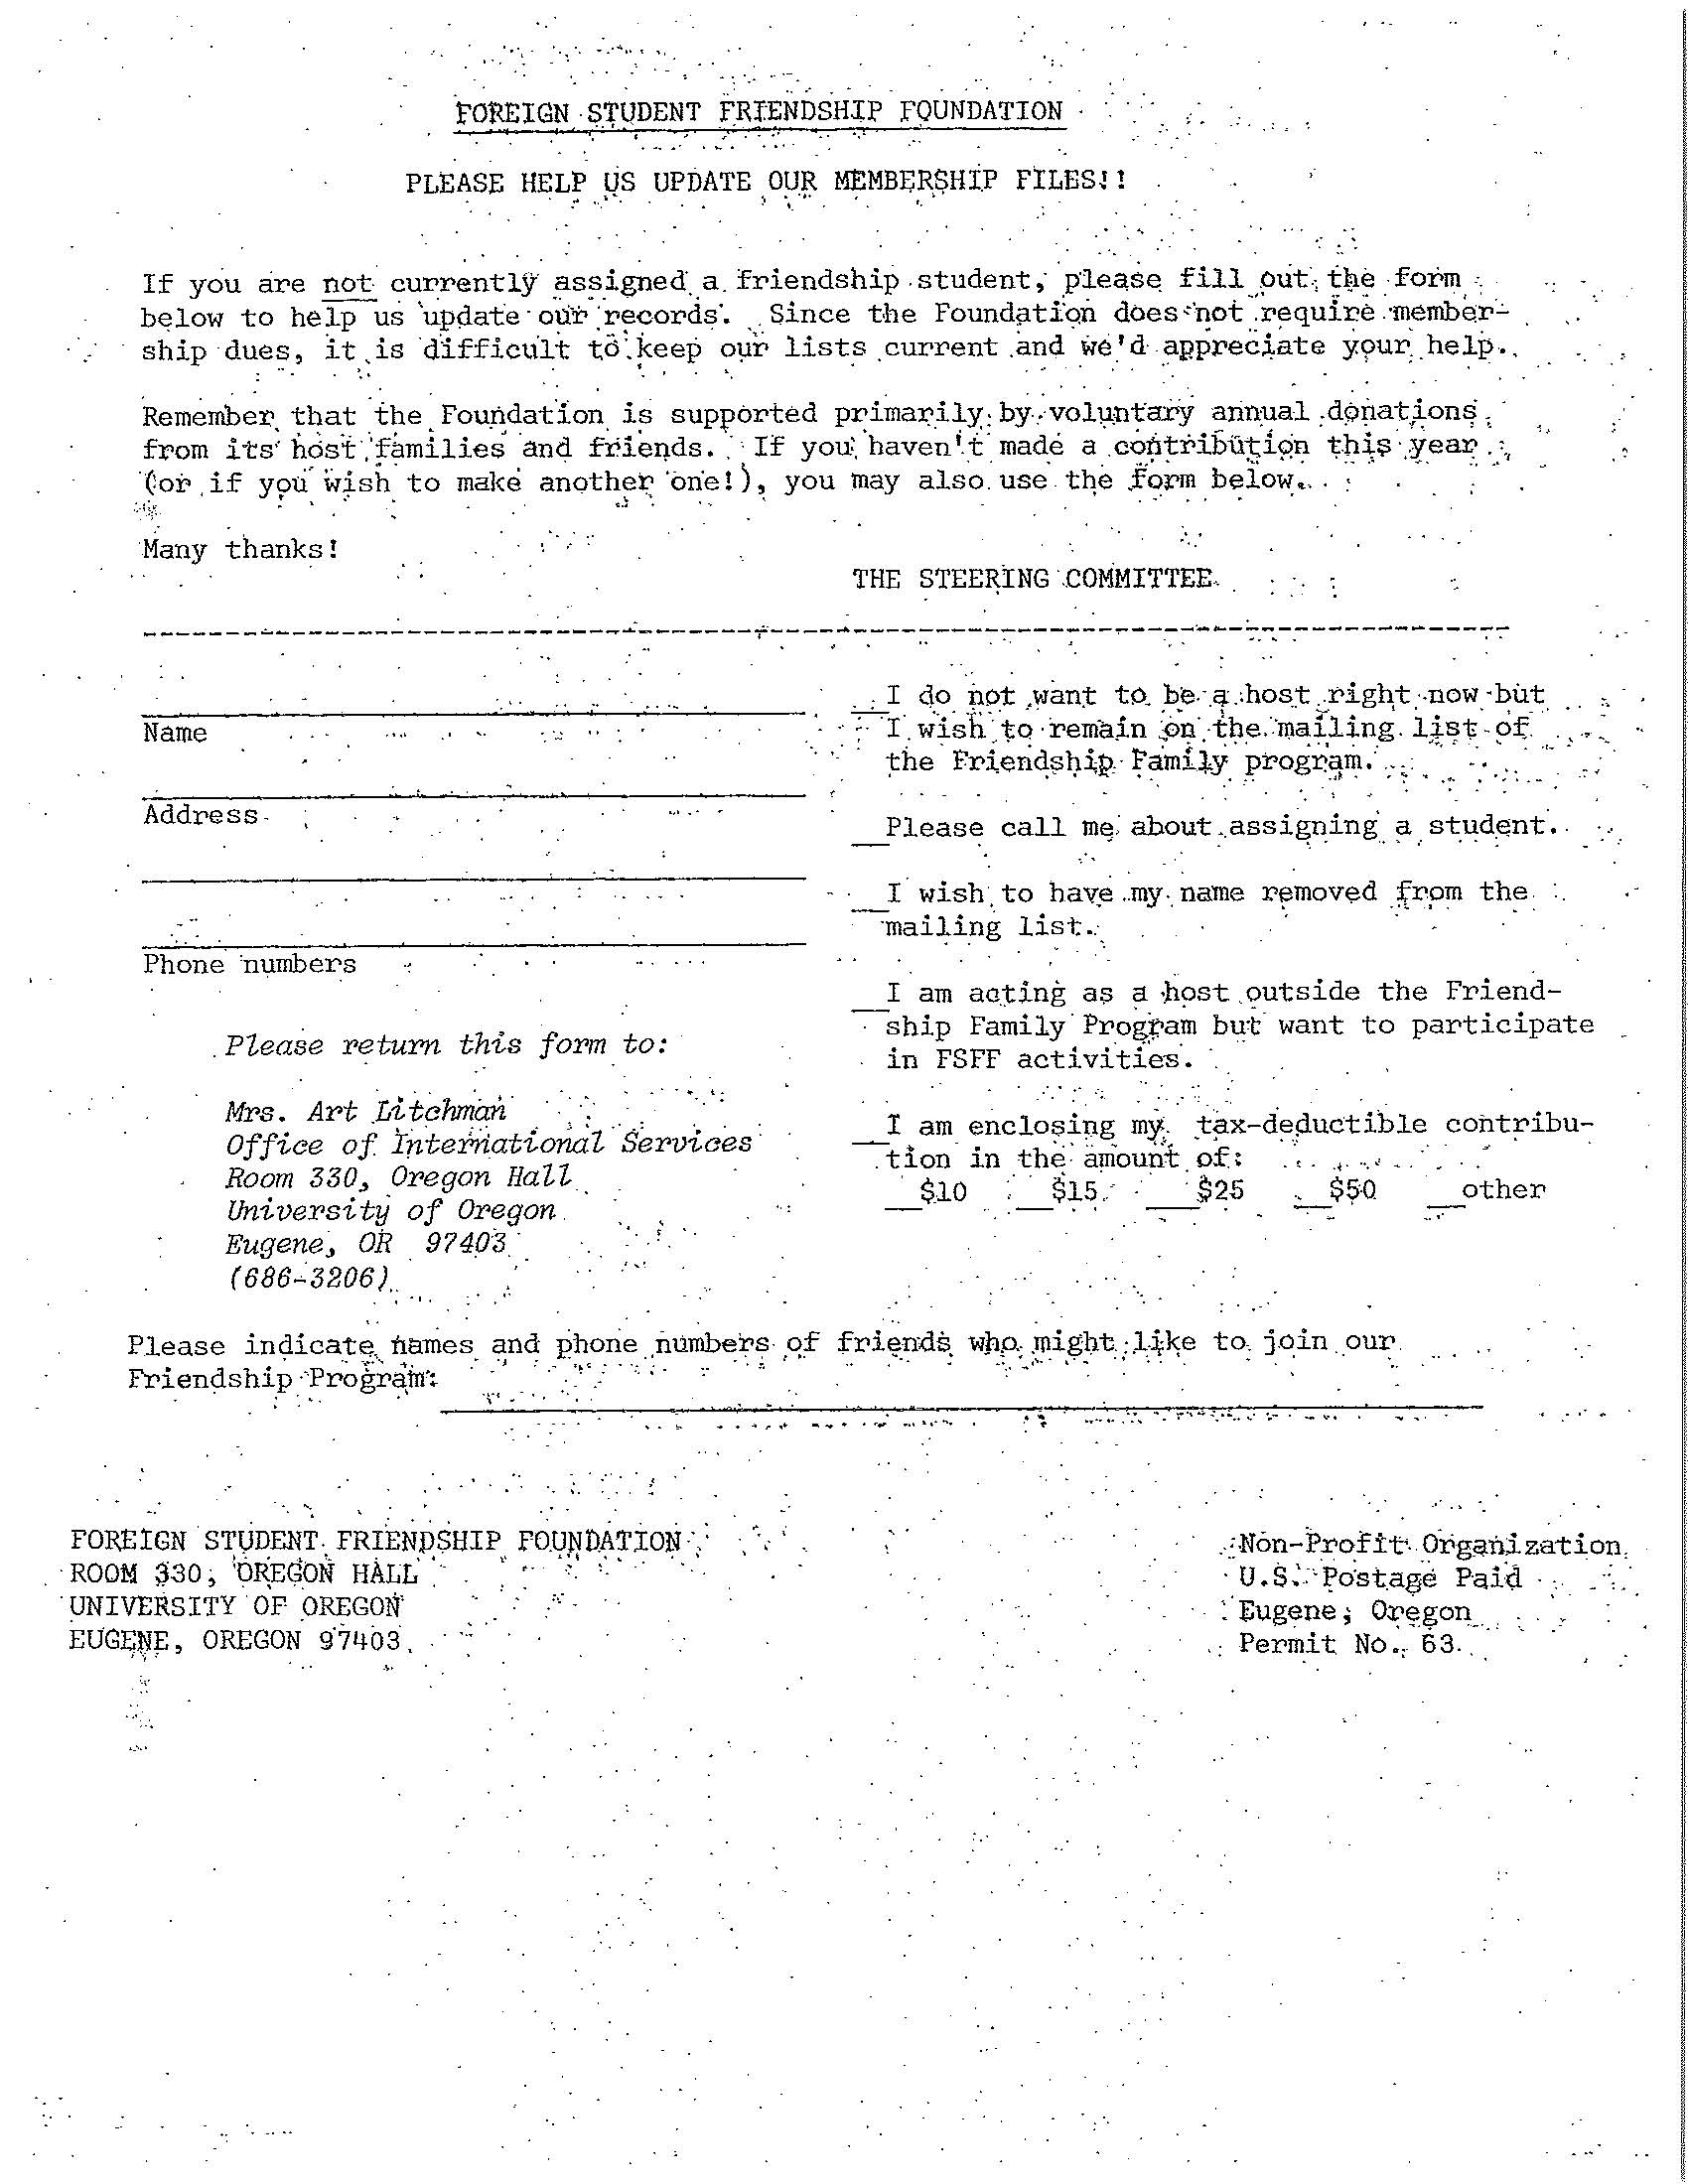 1983 Winter Newsletter, Page_4